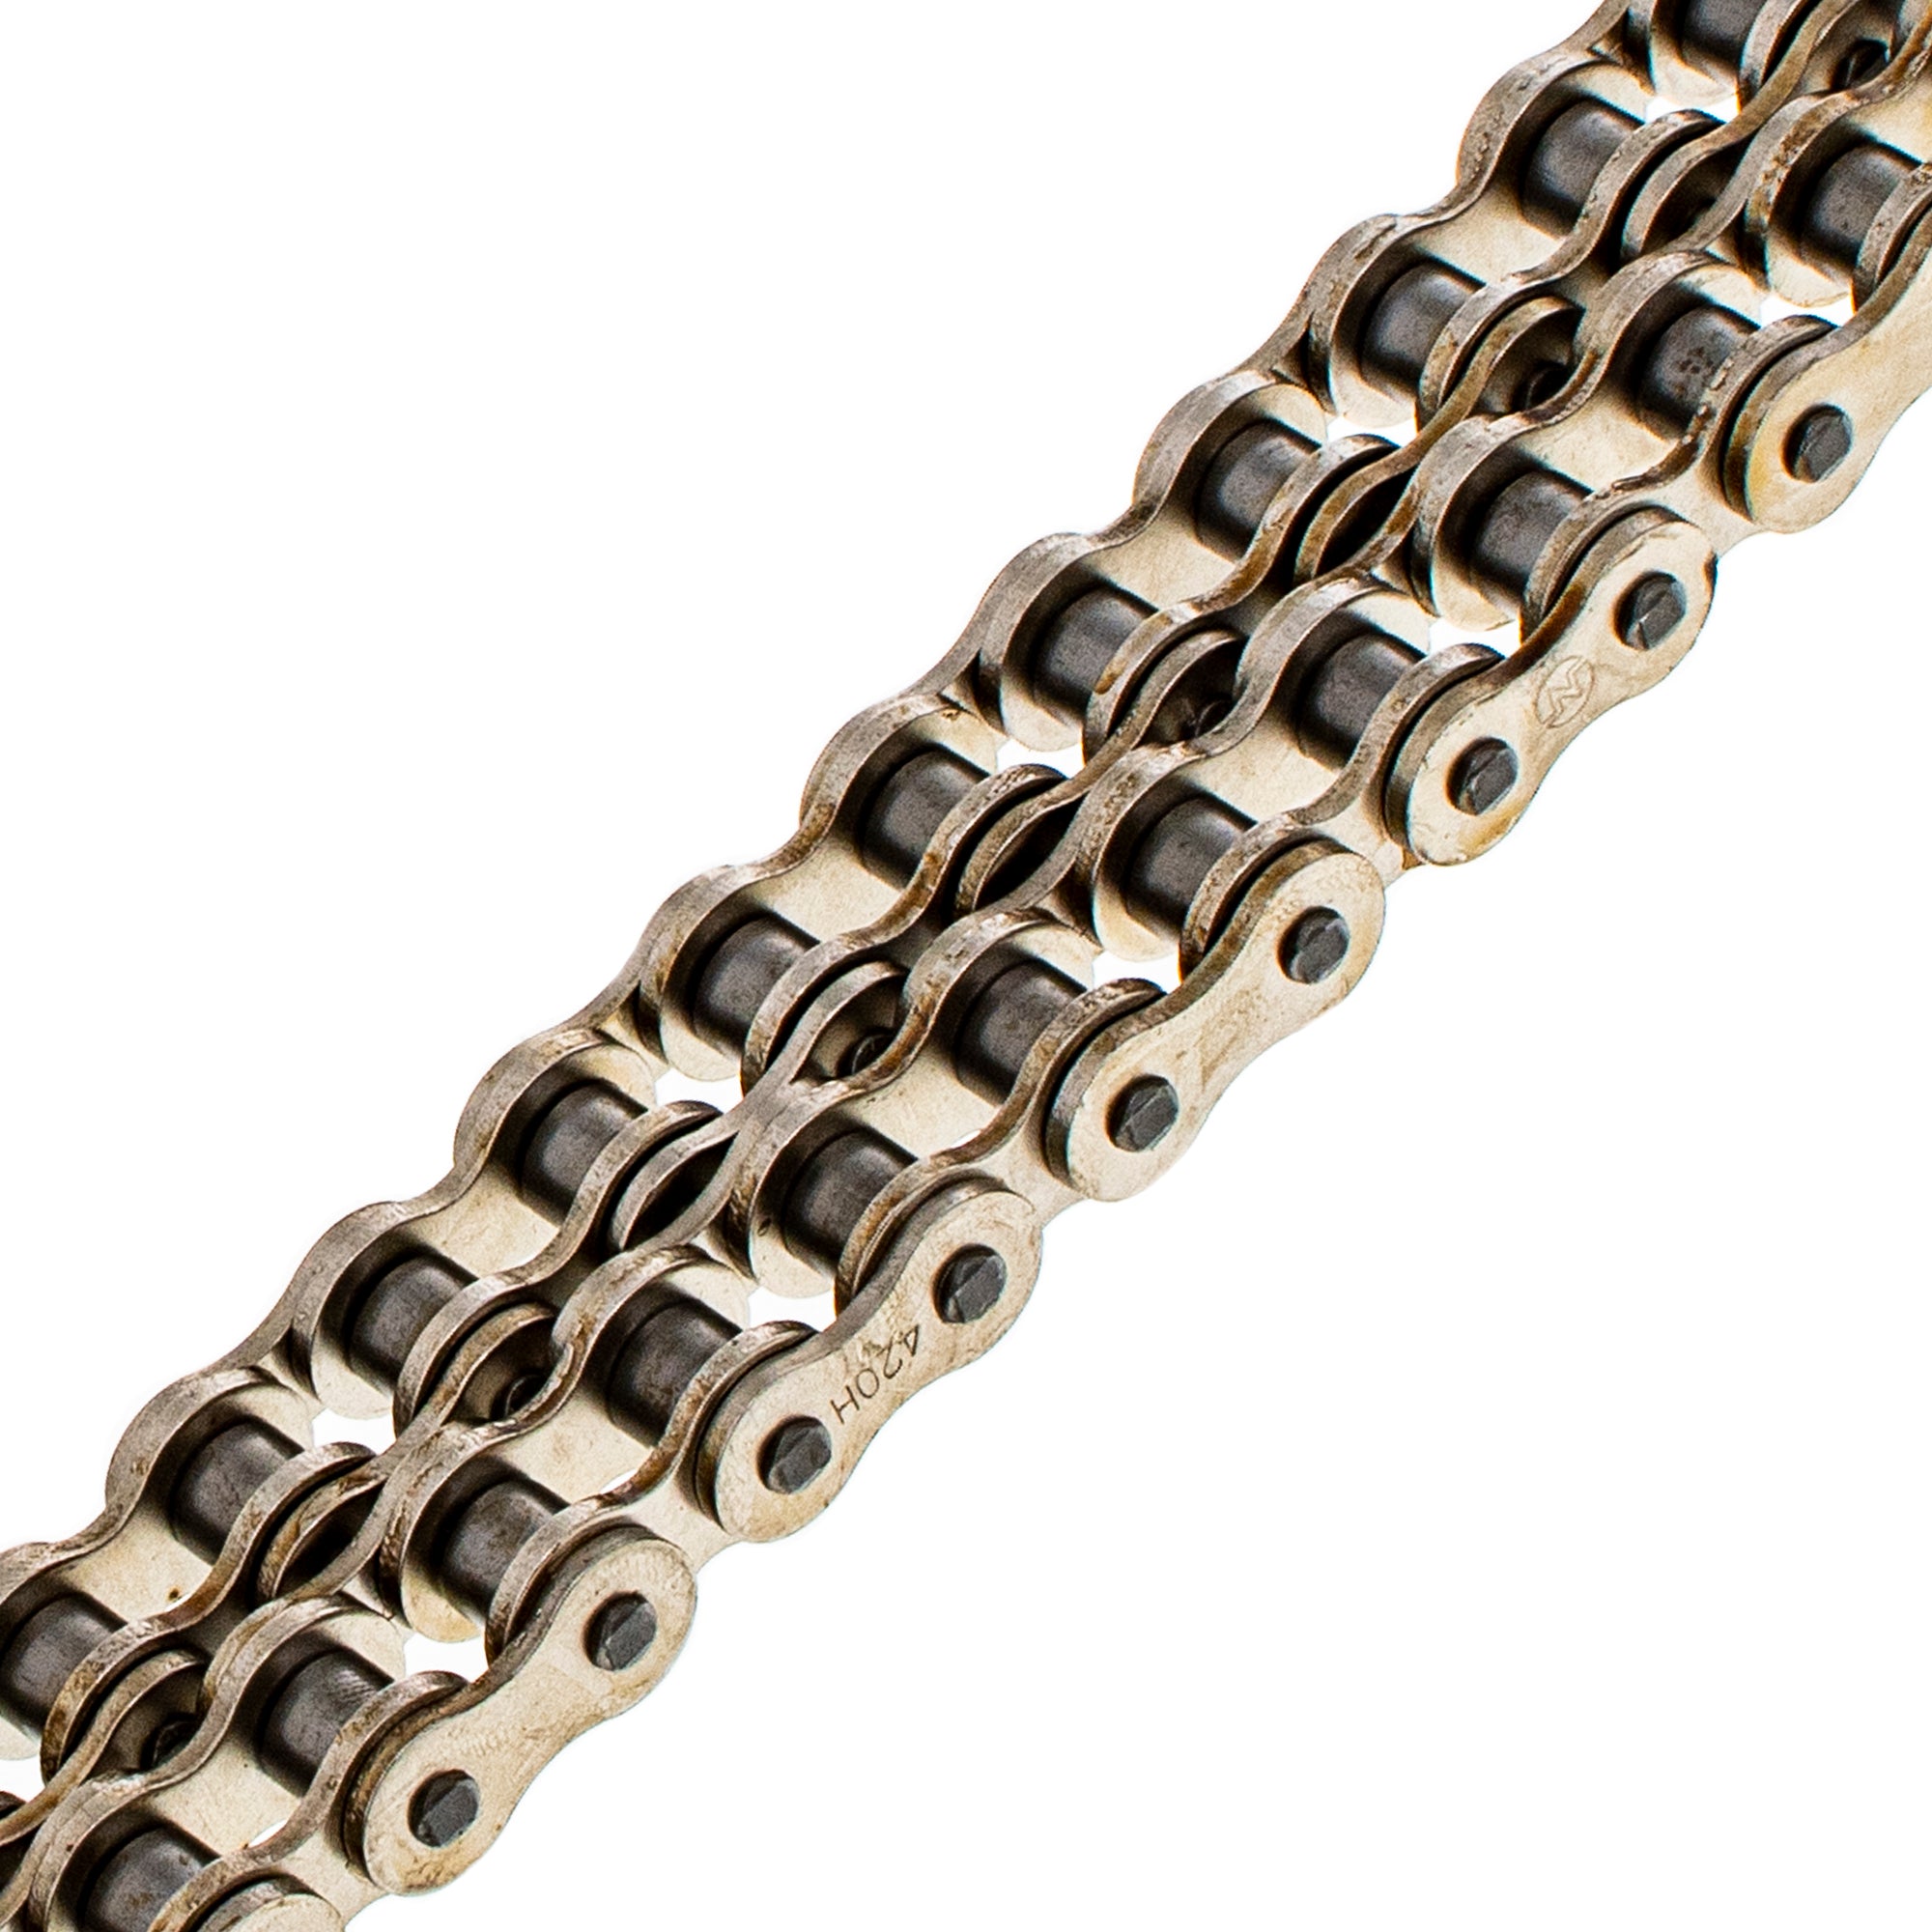 Drive Chain 122 Standard Non O-Ring w/ Master Link for zOTHER RS50 MTX80 MTX50 DT50 5240 NICHE 519-CDC2341H